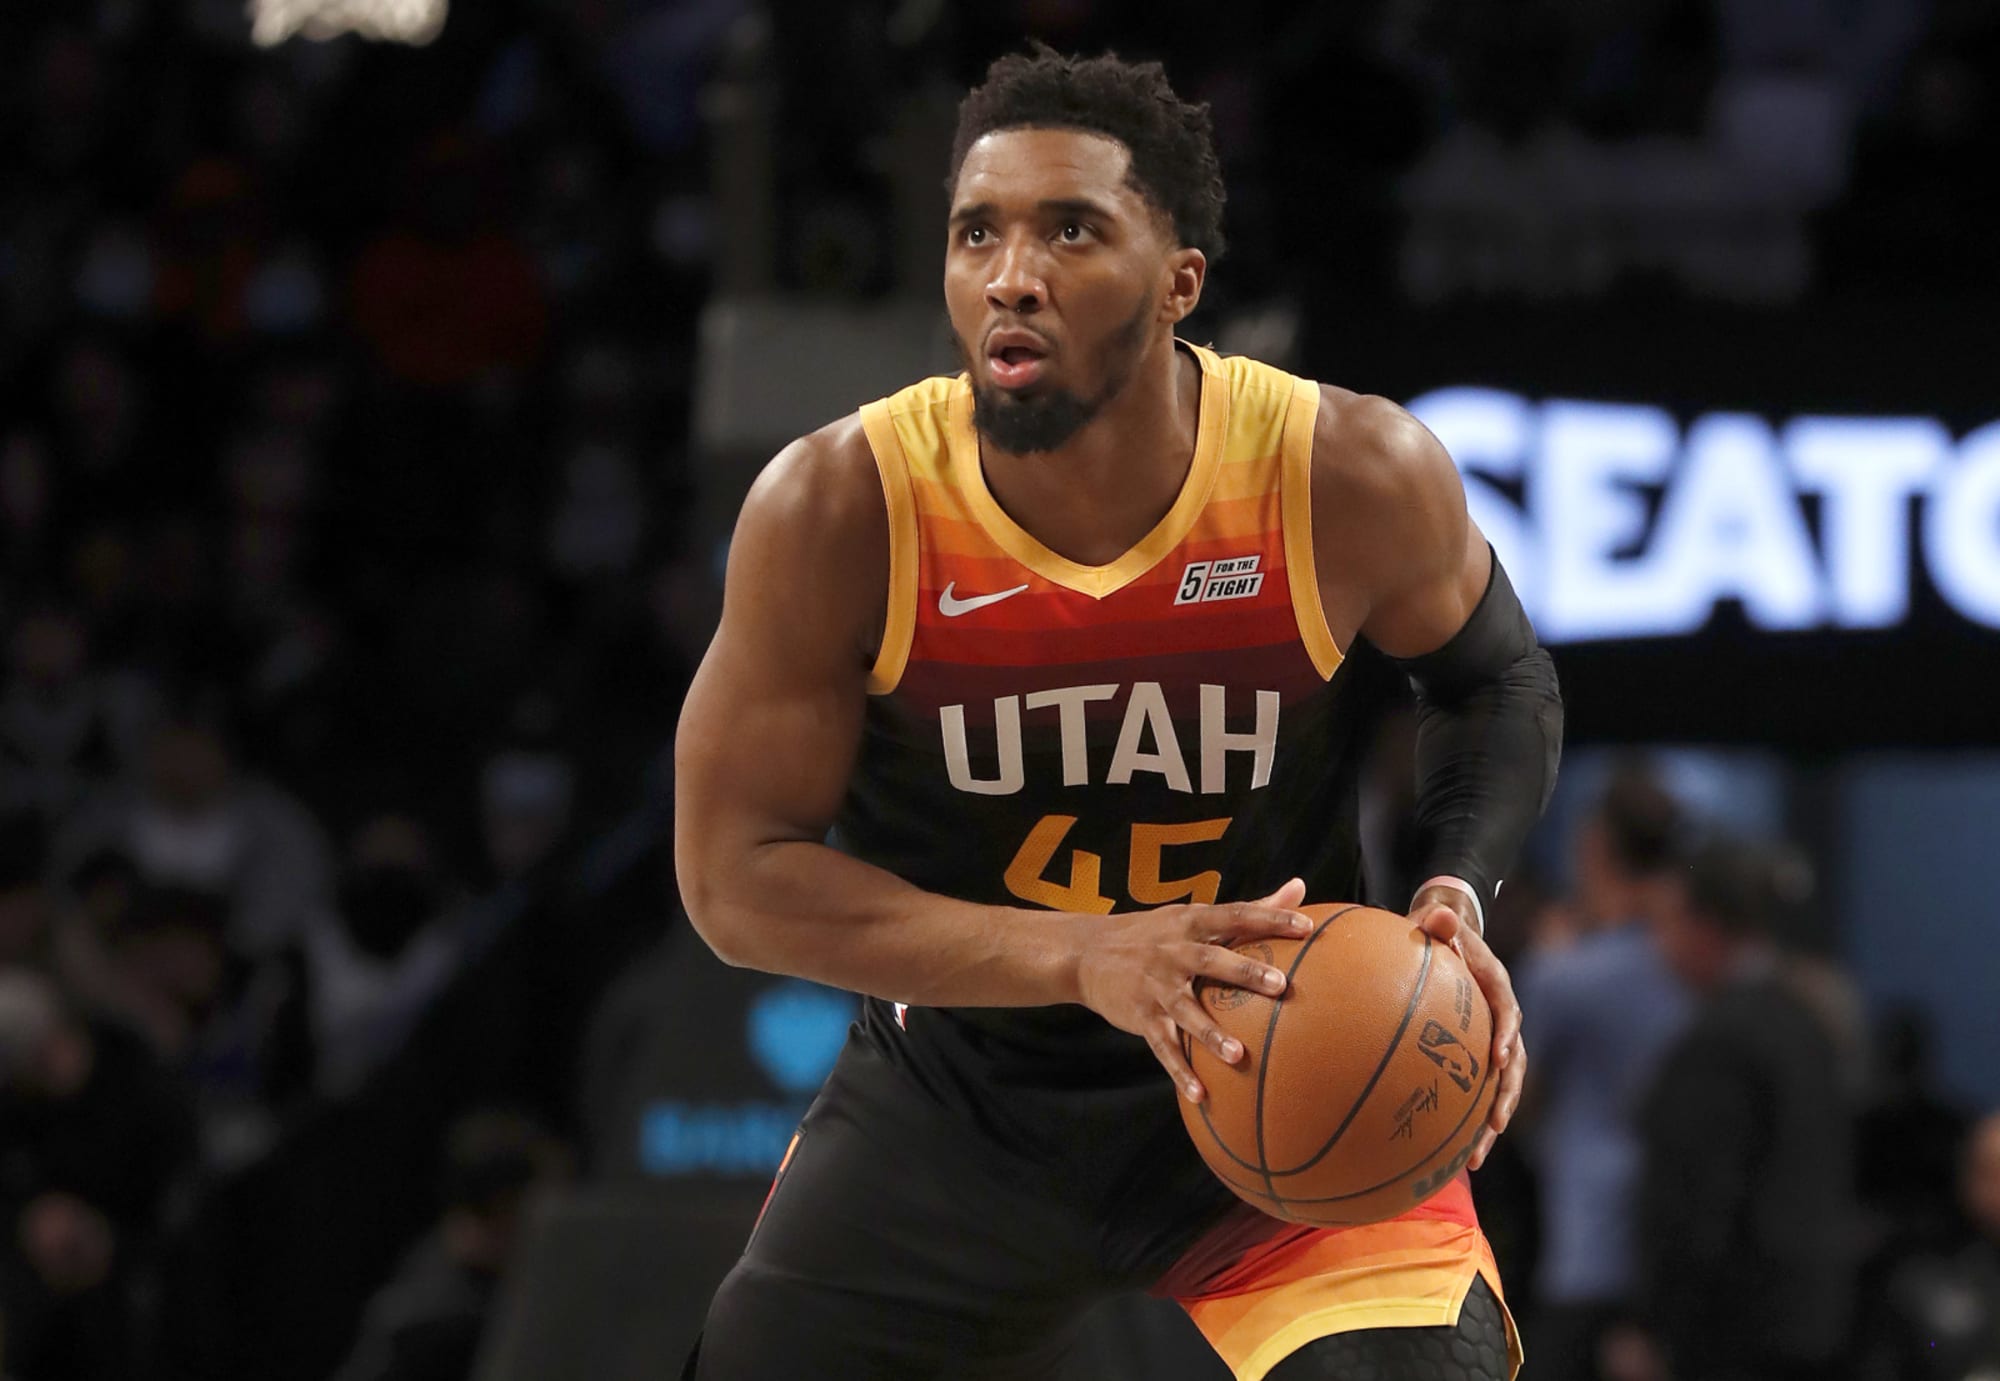 Latest Knicks-Donovan Mitchell trade news gives insight on Danny Ainge’s demands